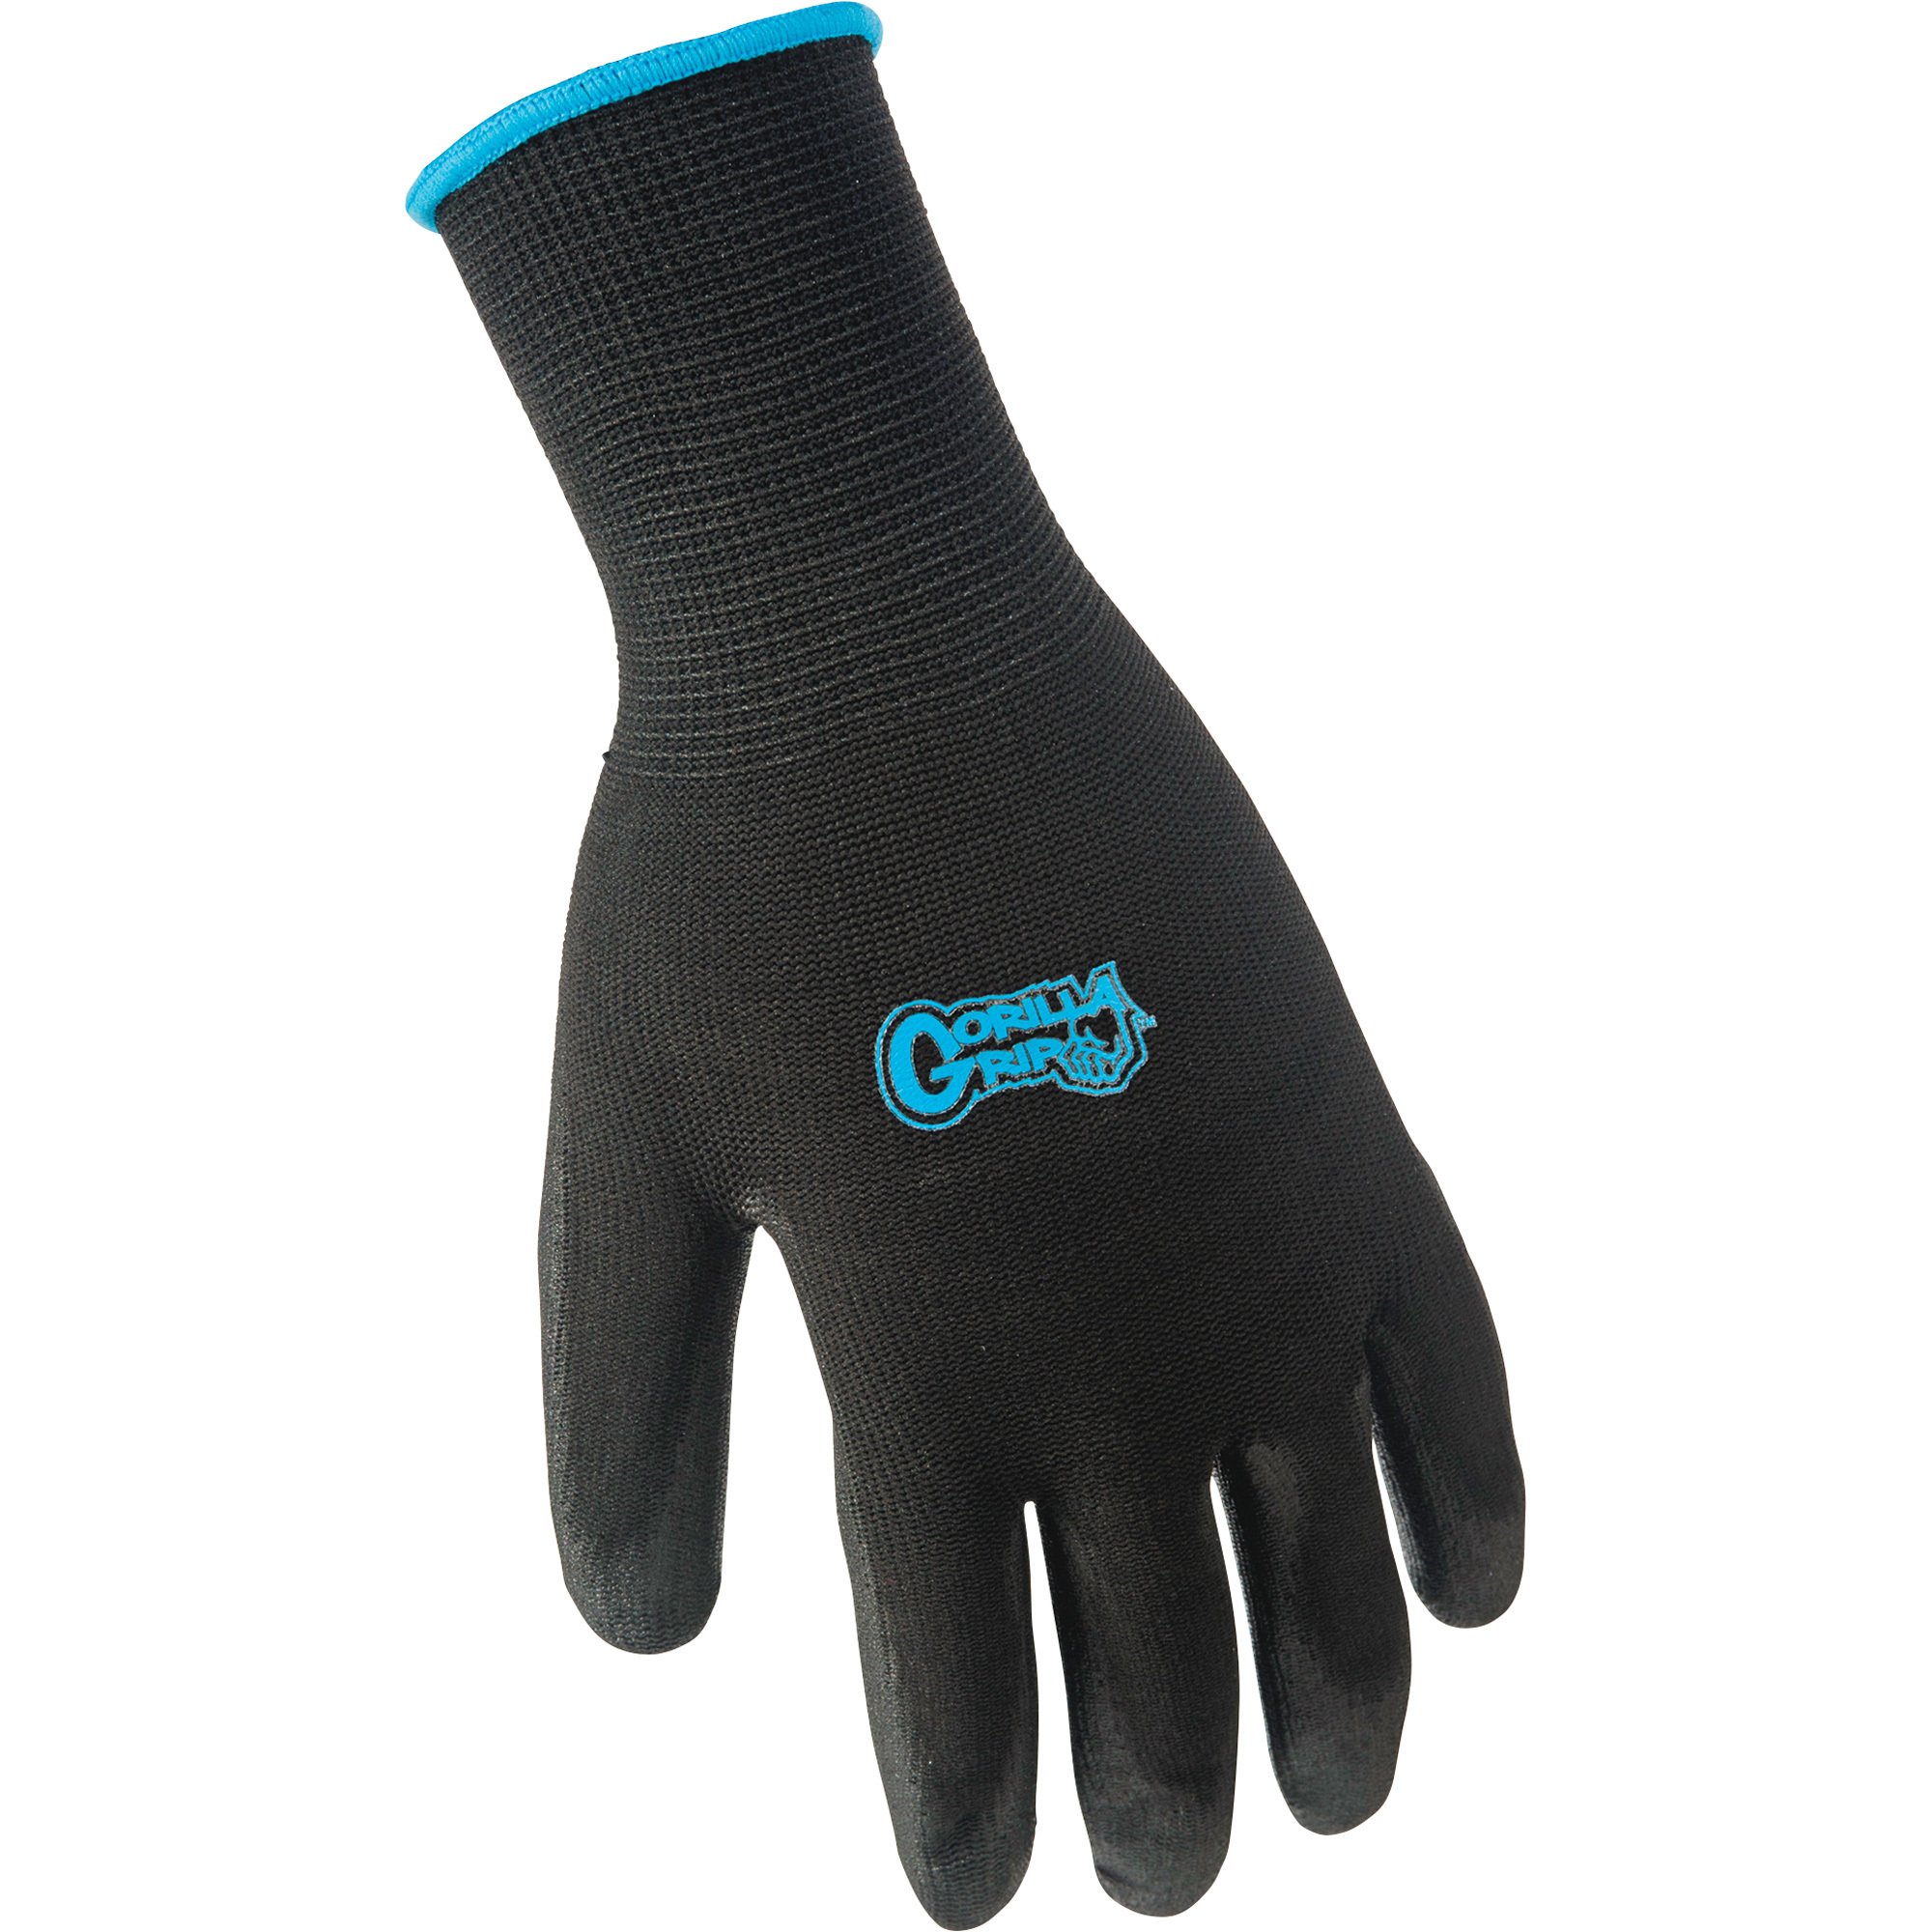 20 Pairs Large Gorilla Grip Gloves Grease Monkey for sale online